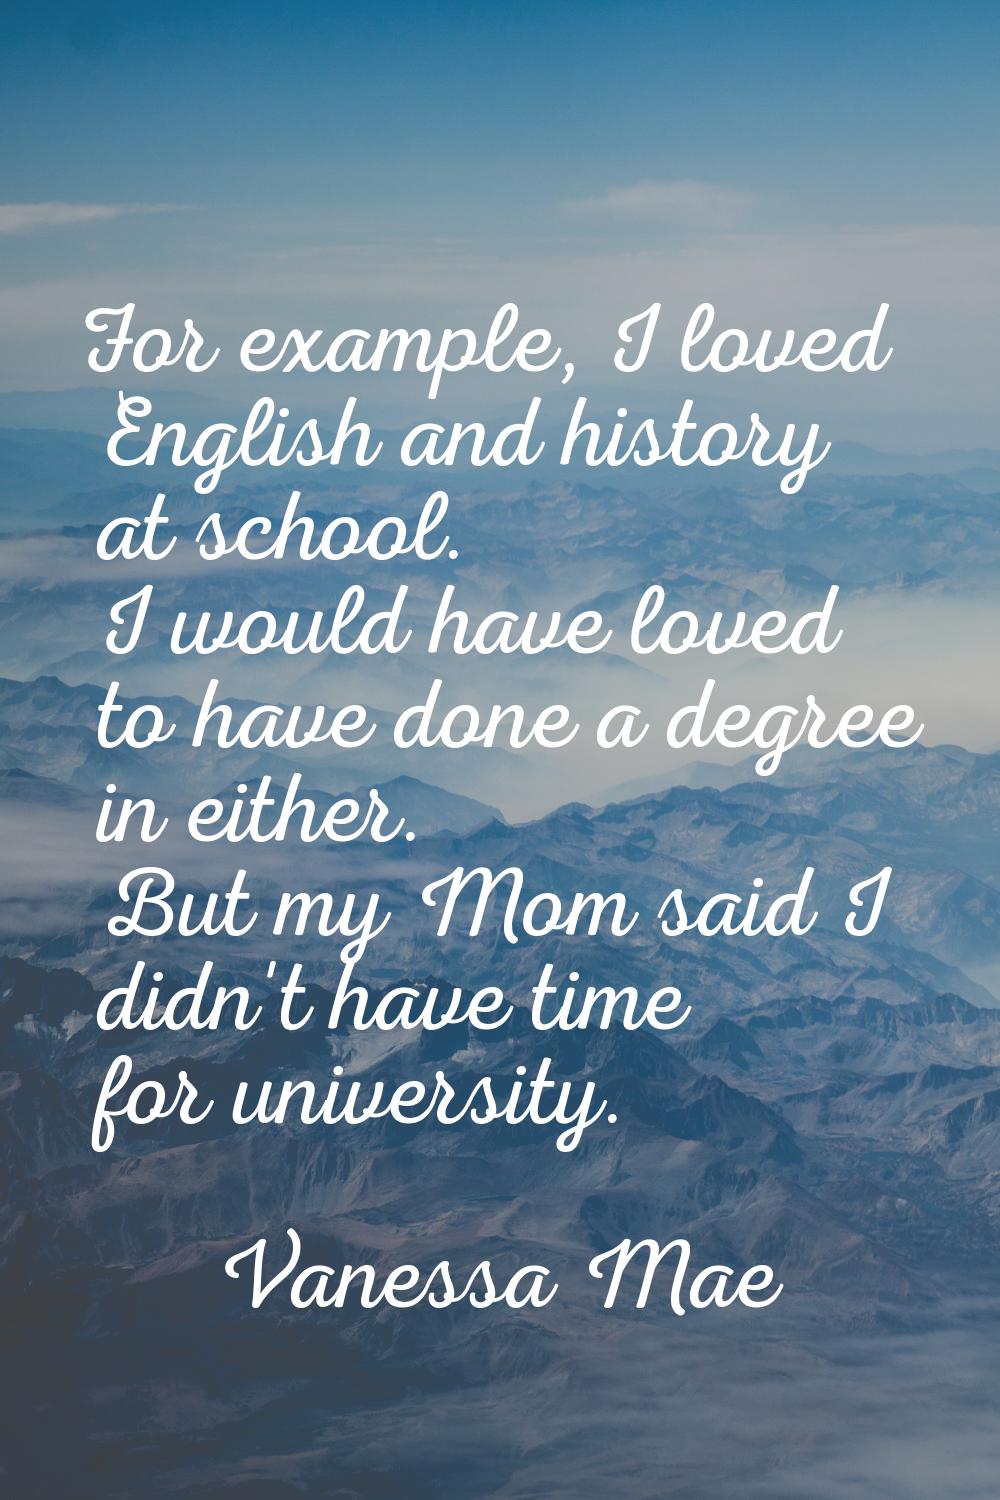 For example, I loved English and history at school. I would have loved to have done a degree in eit